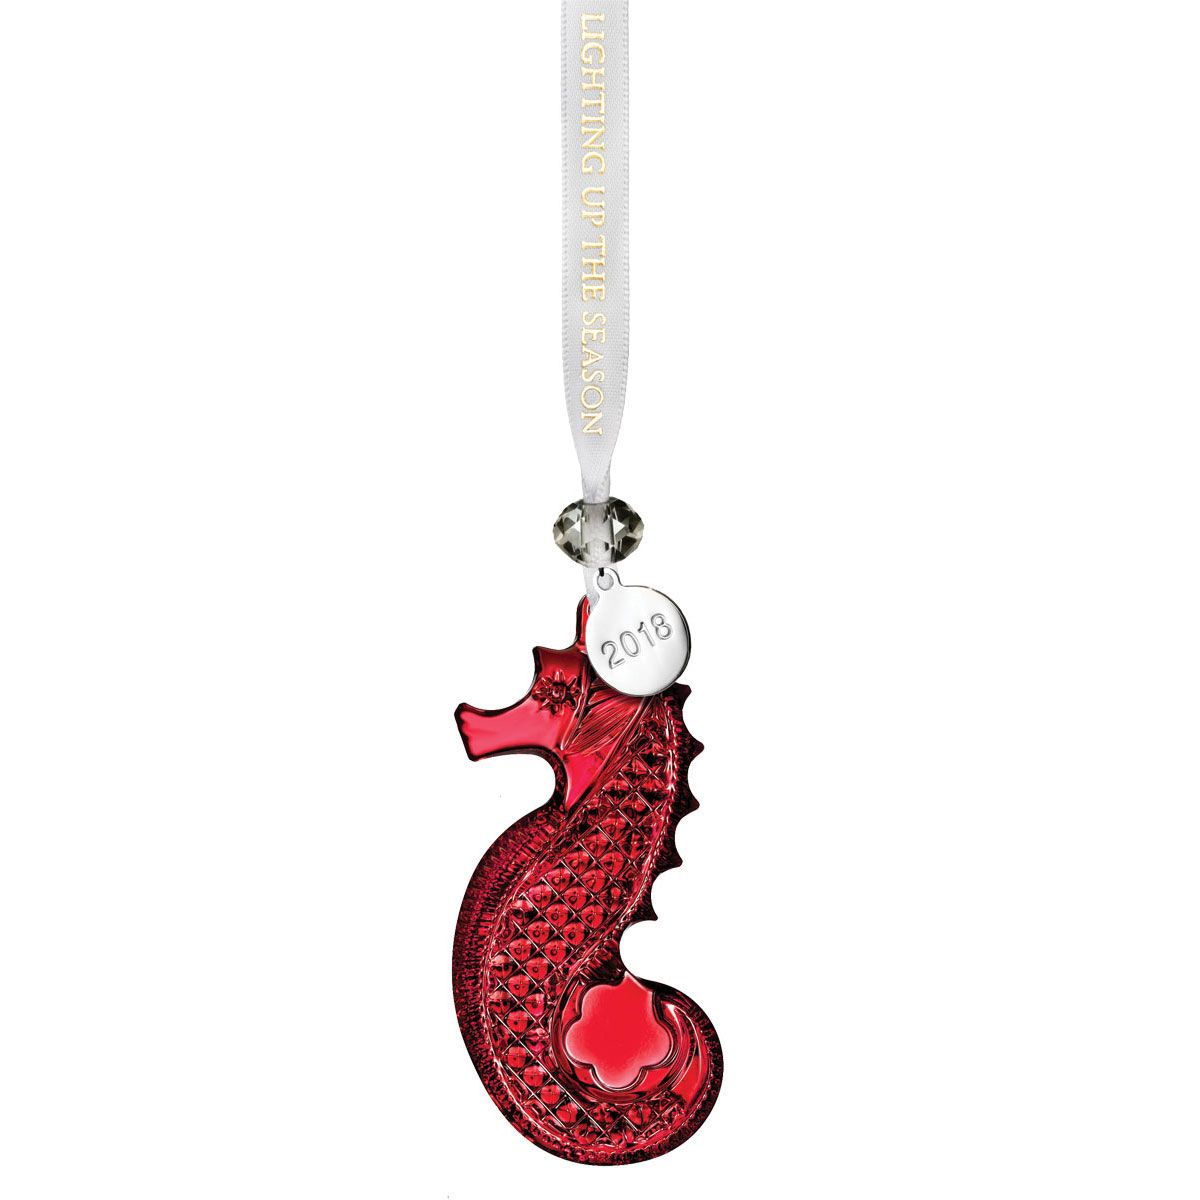 Waterford 2018 Seahorse Ornament, Red